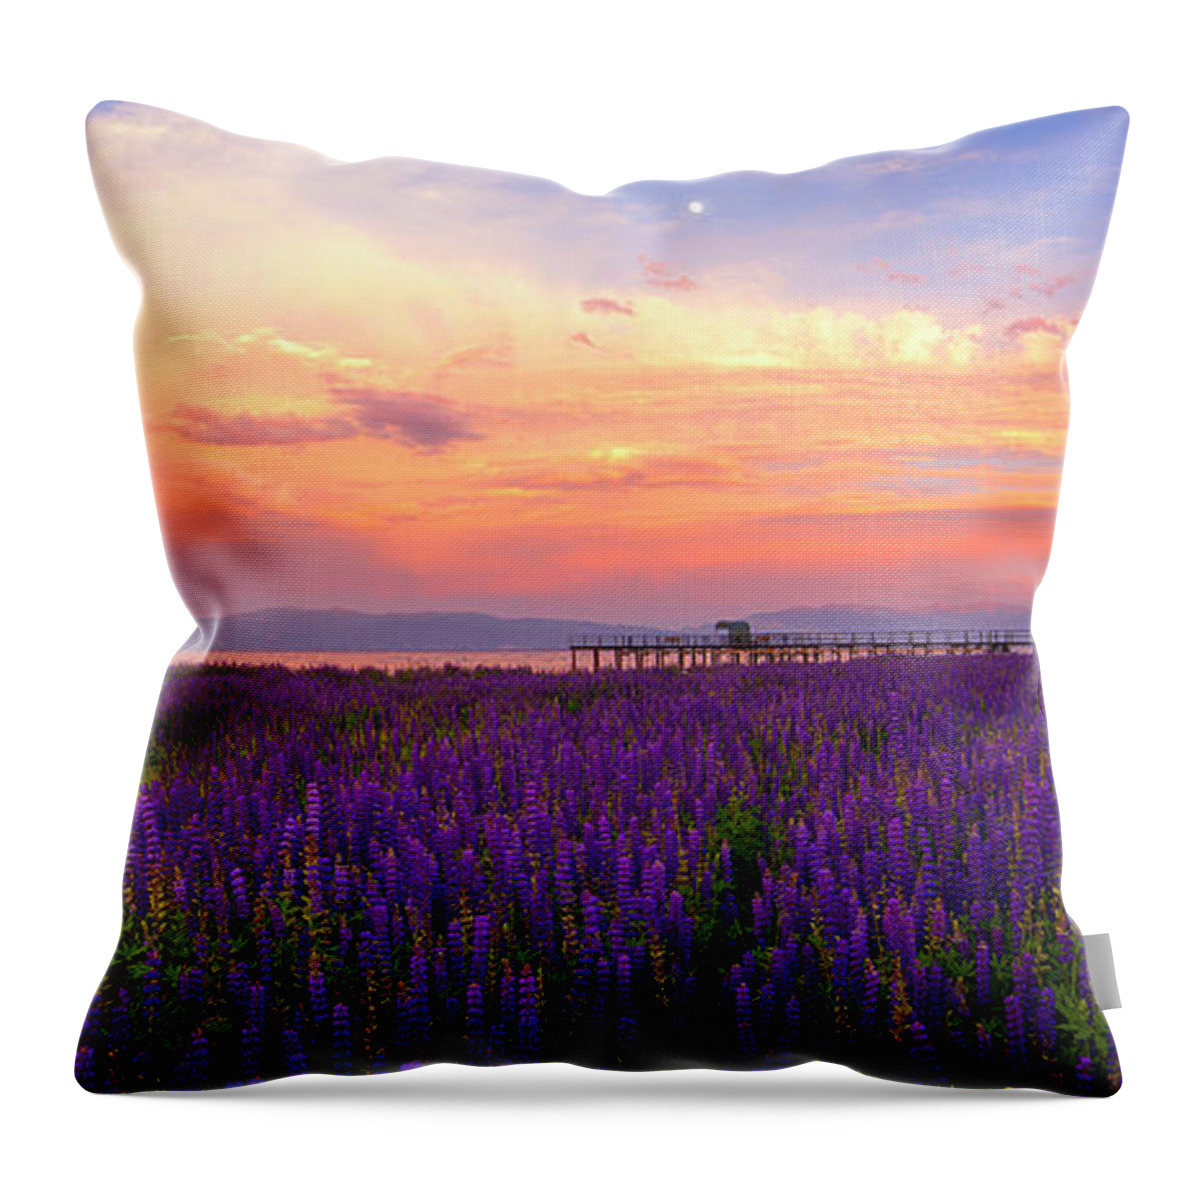 Lupine Throw Pillow featuring the photograph Tahoe City Lupine Sunset by Brad Scott by Brad Scott